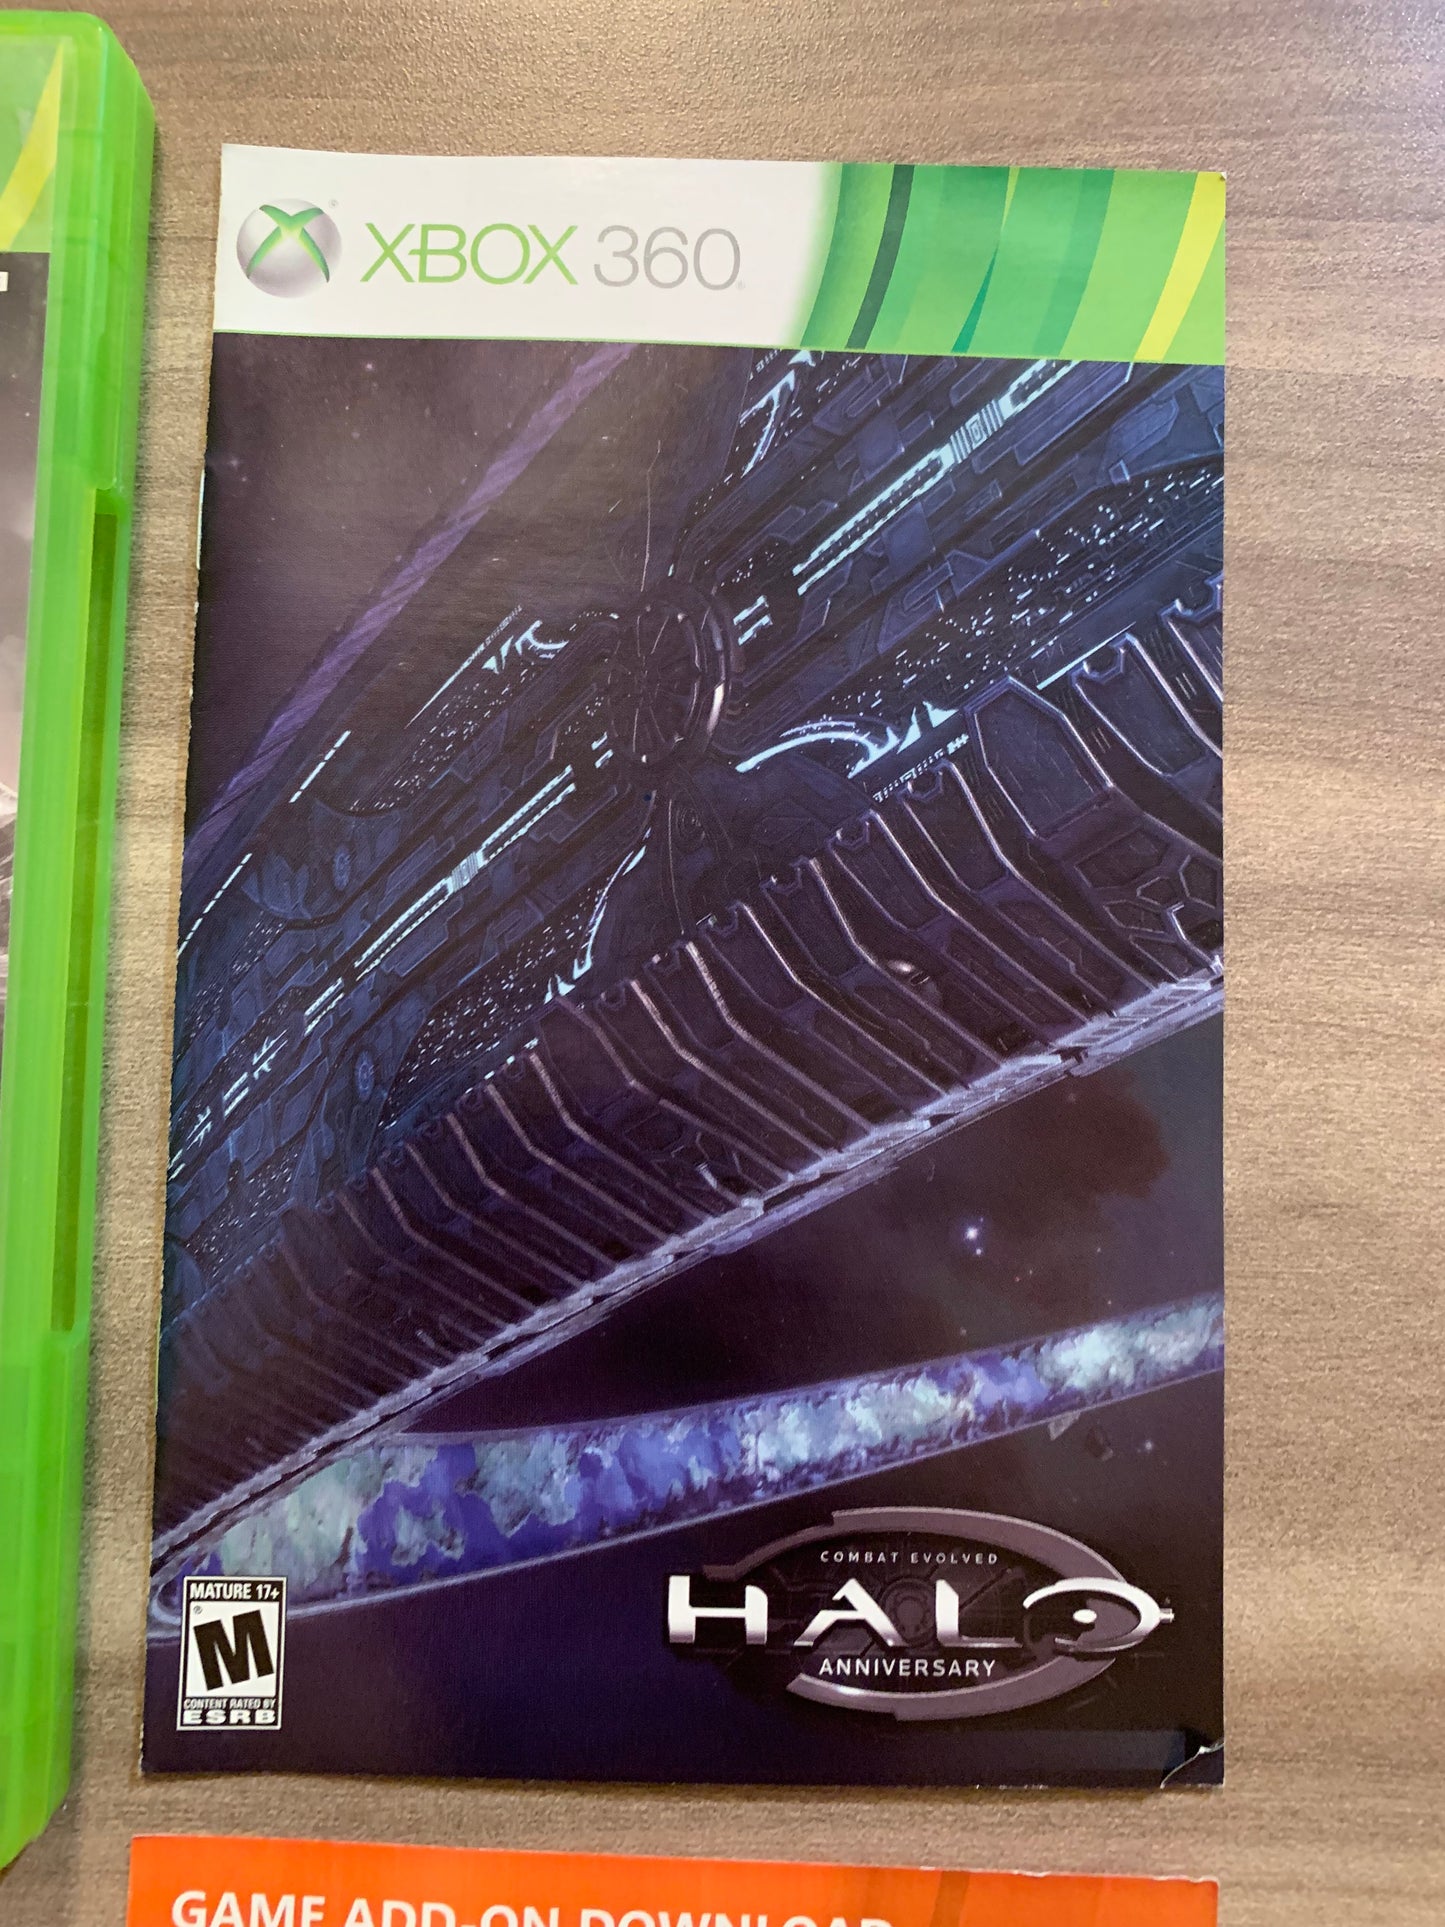 MiCROSOFT XBOX 360 | HALO COMBAT EVOLVED ANNiVERSARY | NOT FOR RESALE